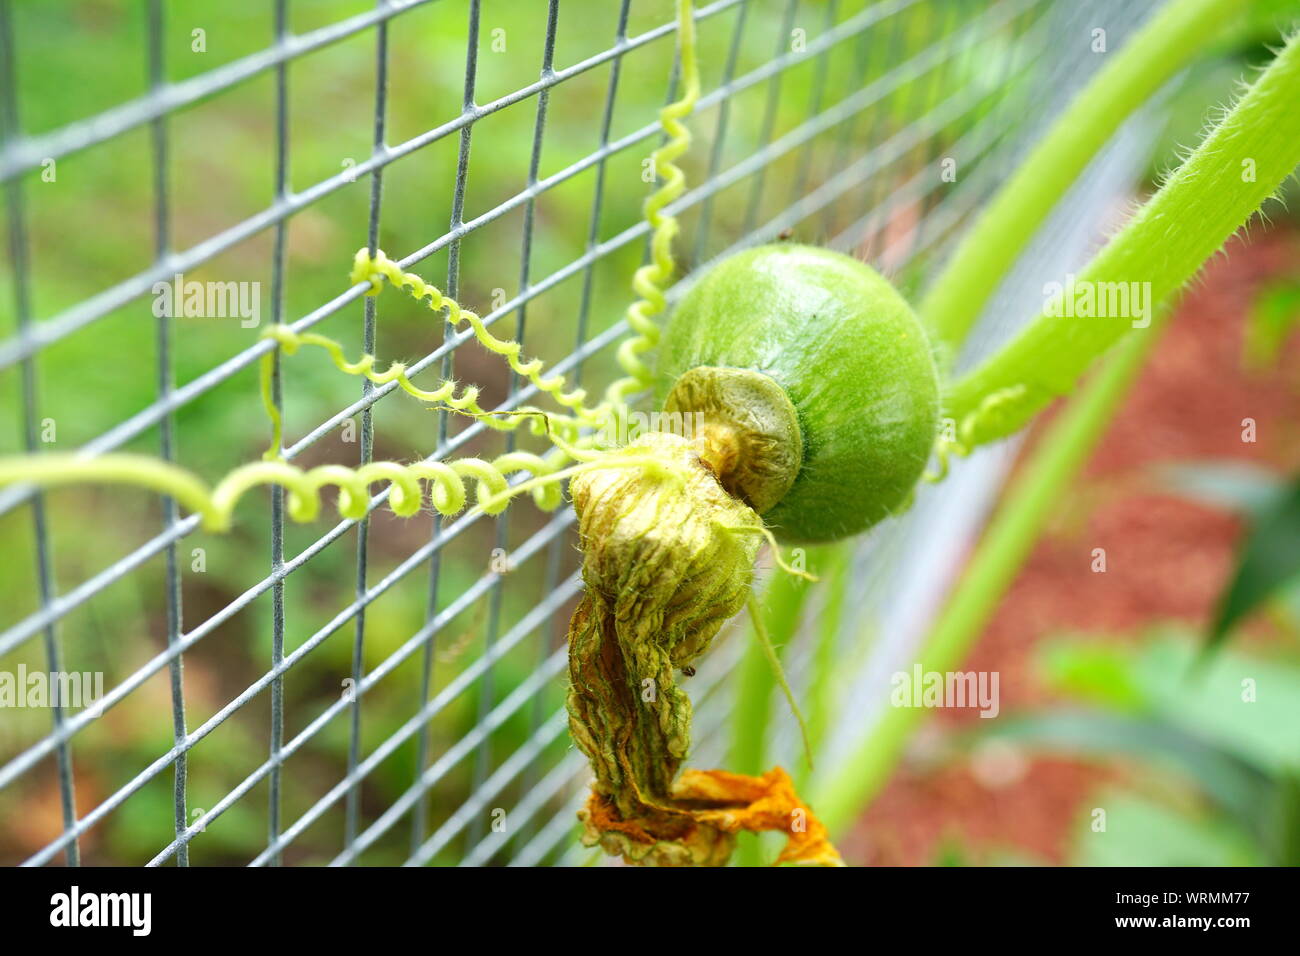 Baby cantaloupe plant with tendrils latching to a wire fence Stock Photo